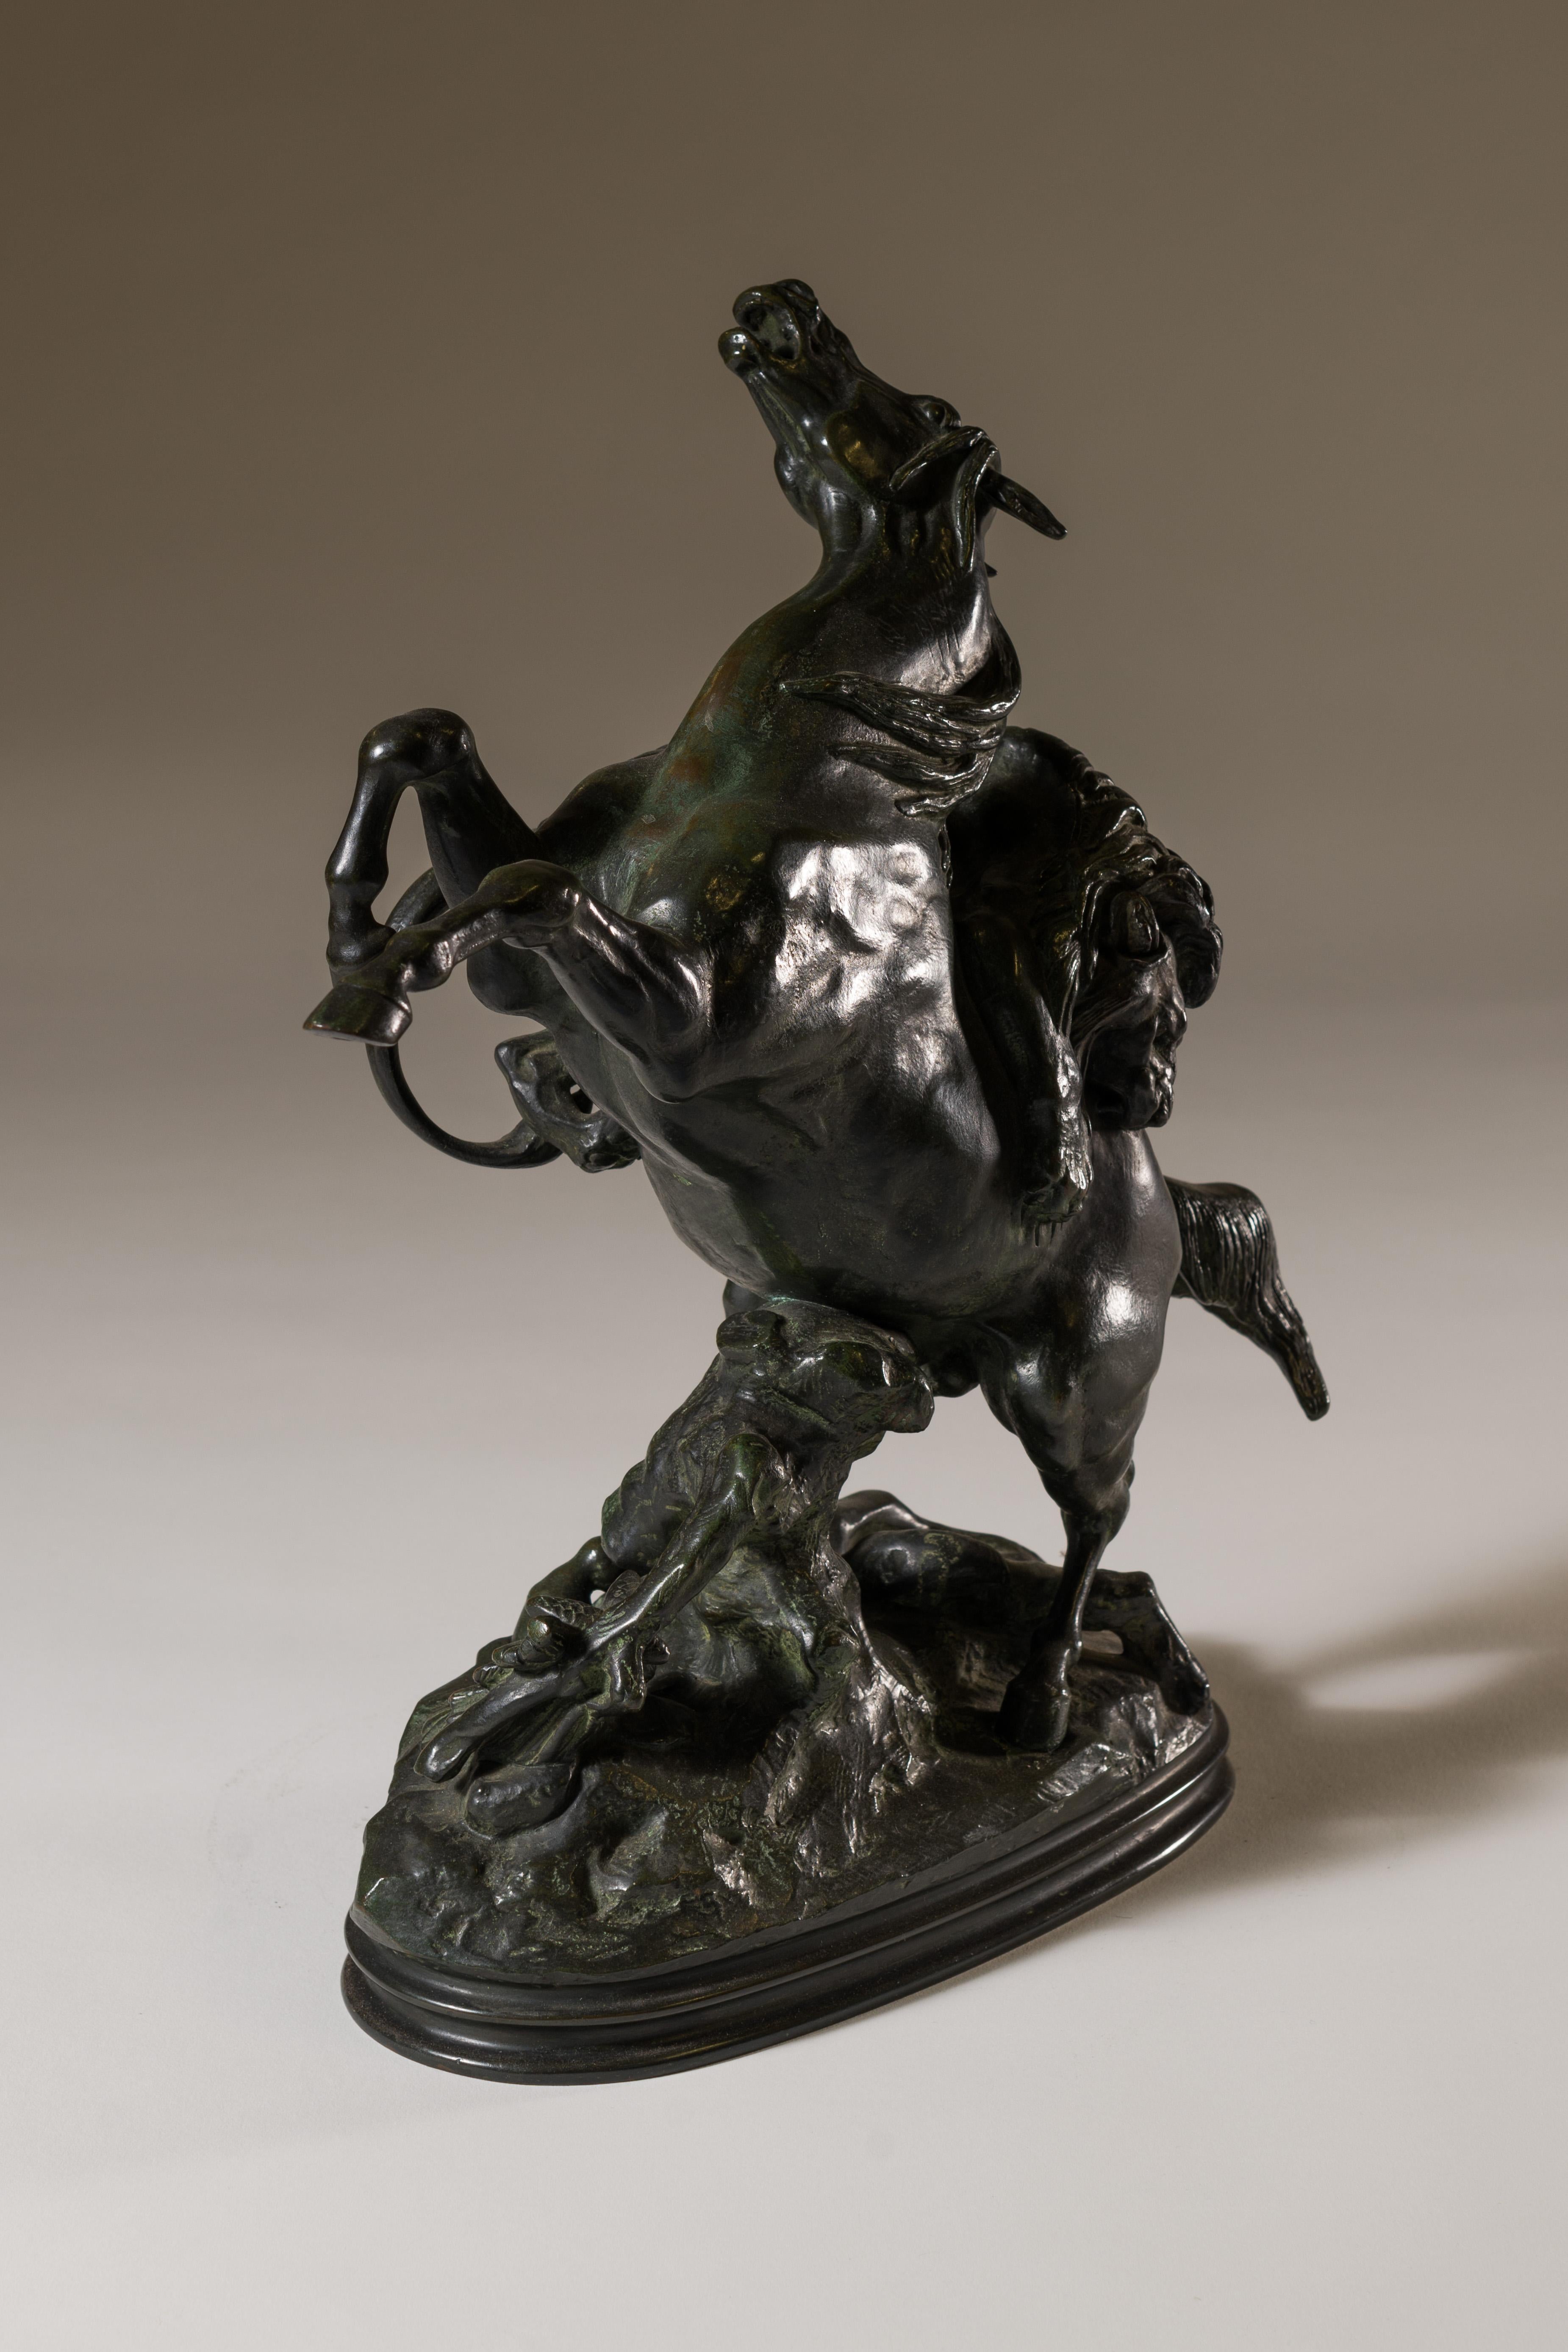 This dynamic bronze done in a green patina is perfect size to grace a table or pedestal. Antoine-Louis Barye was acclaimed  as the finest sculptor of the French Animalier School. As a 19th century sculptor he was an advocate for both naturalism and